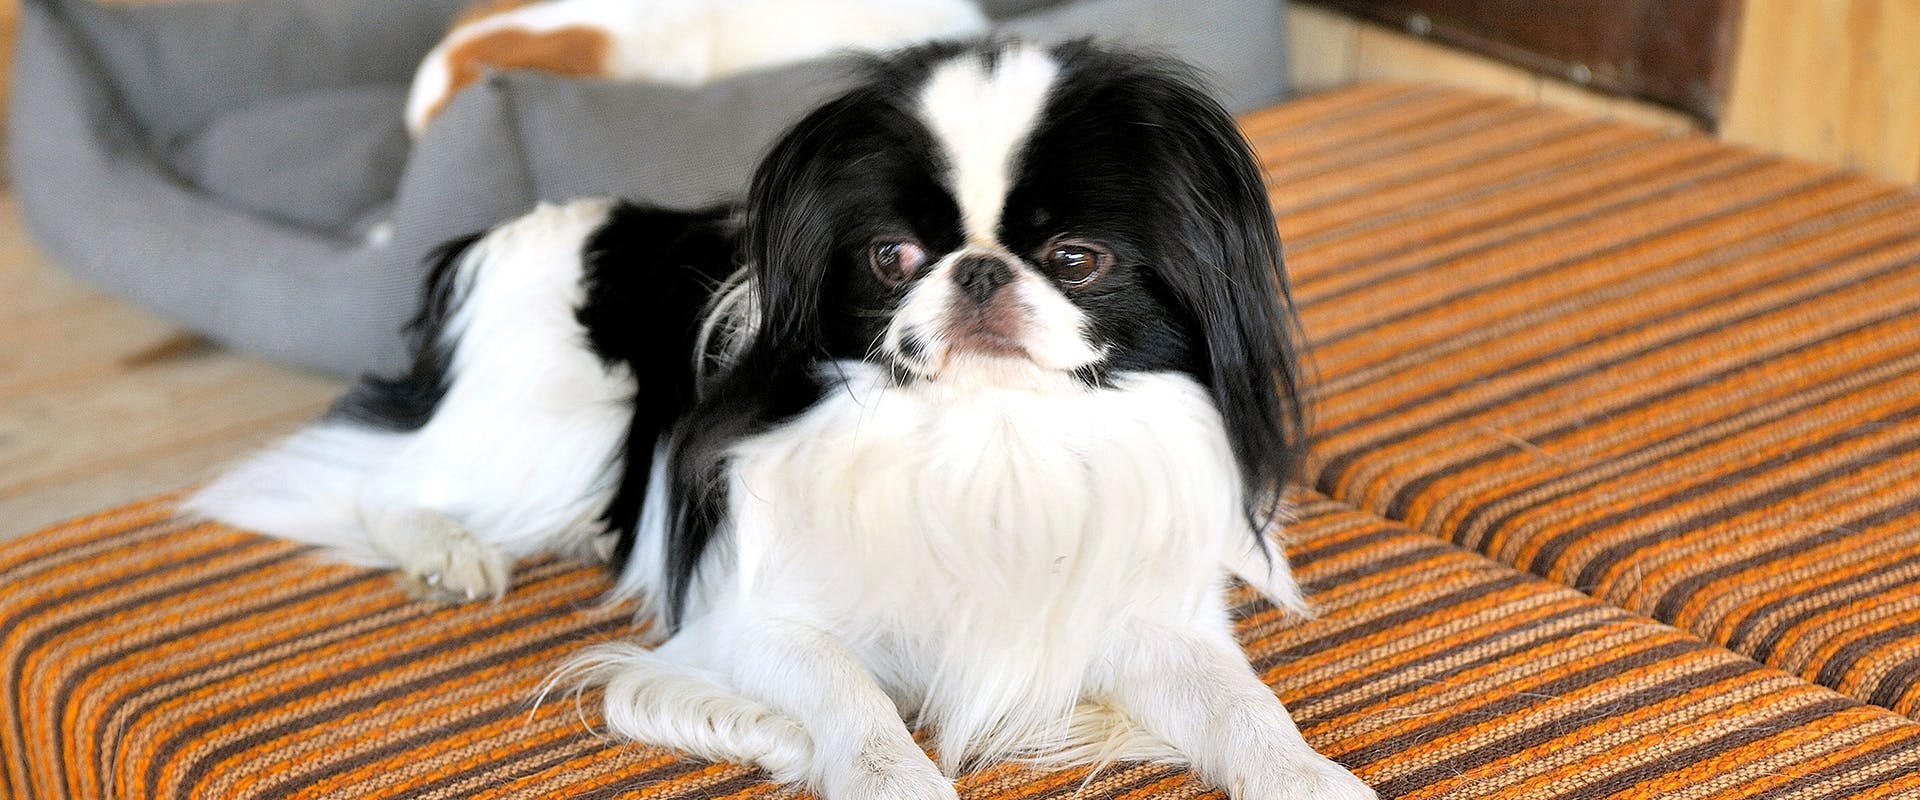 A Japanese Chin sitting on a sofa bed